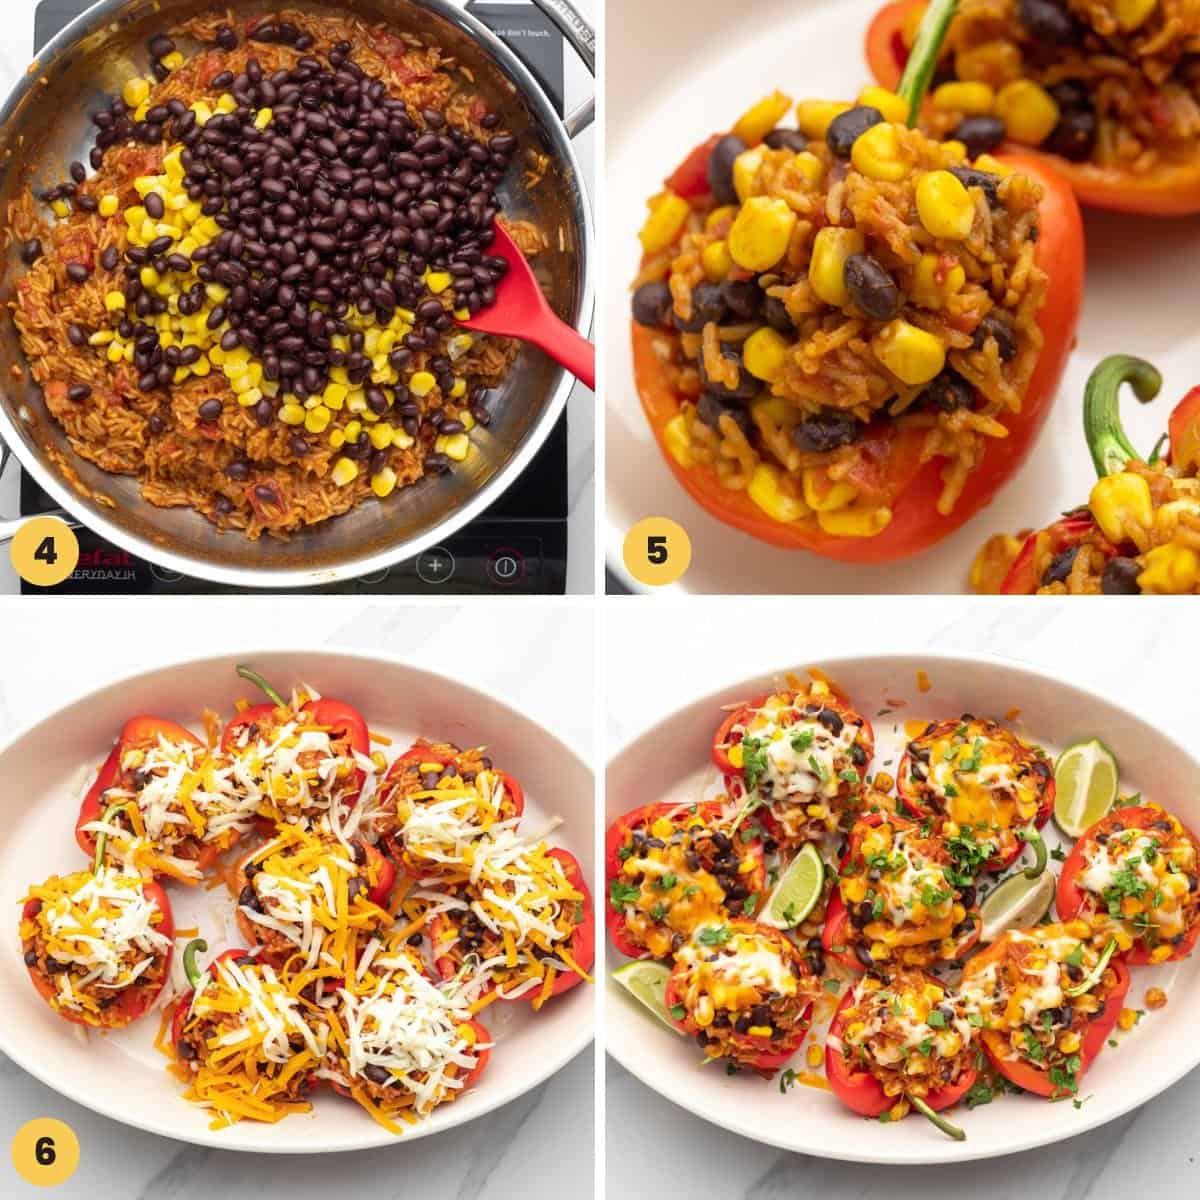 a collage of four images showing how to make a vegetarian filling for stuffed peppers and bake them